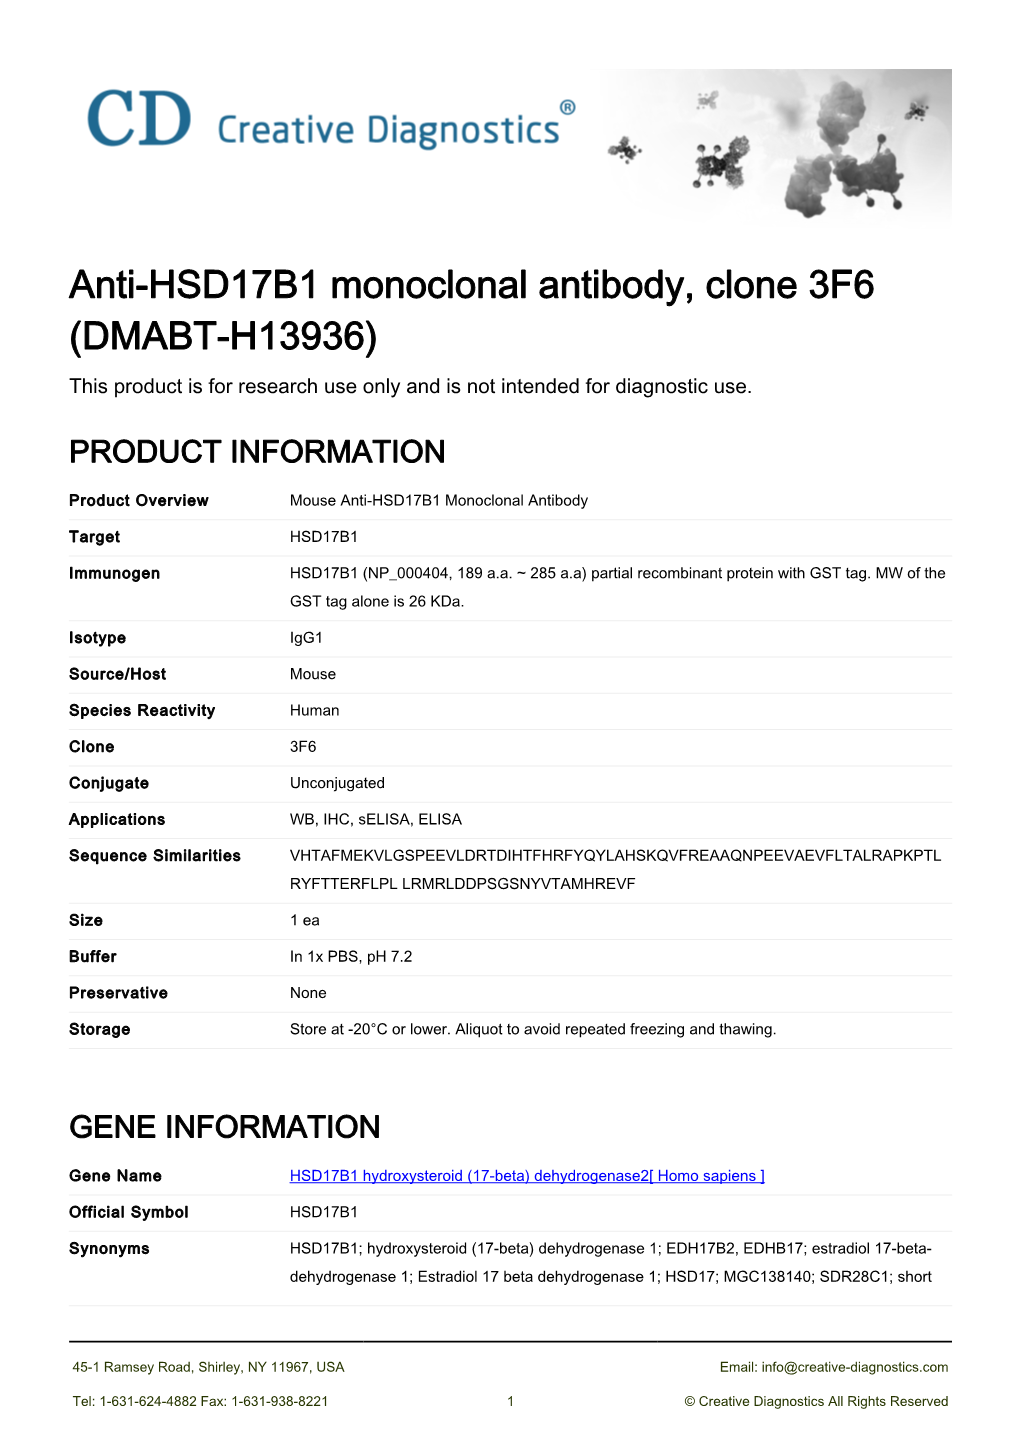 Anti-HSD17B1 Monoclonal Antibody, Clone 3F6 (DMABT-H13936) This Product Is for Research Use Only and Is Not Intended for Diagnostic Use